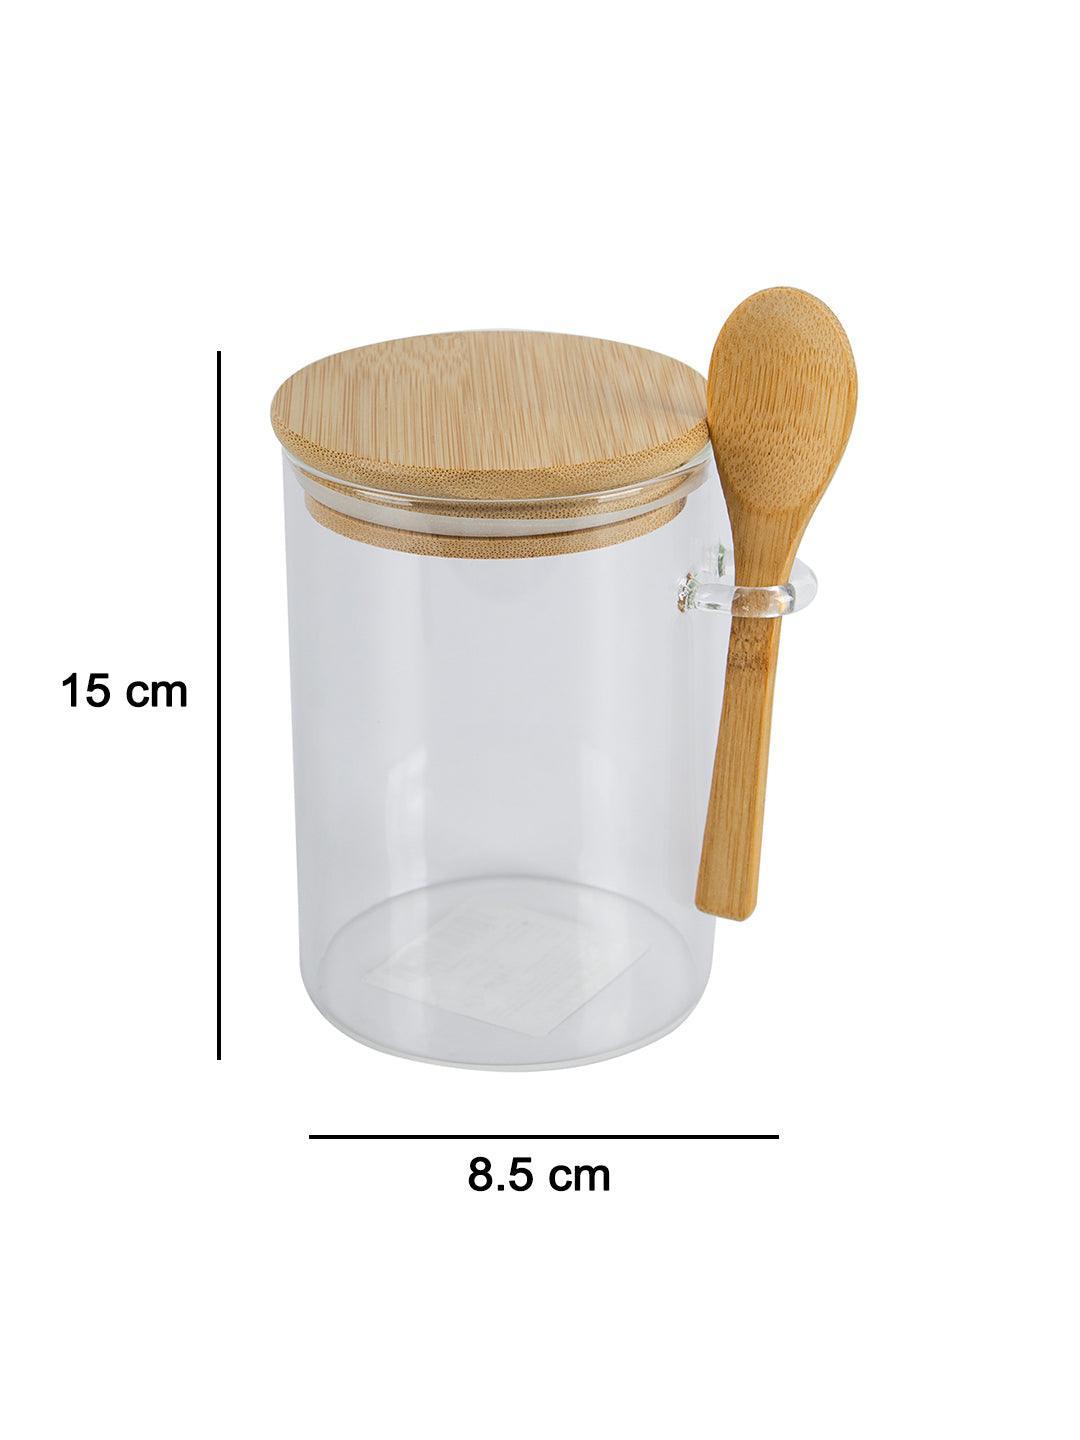 4 Glass Jar With Wood Spoon & Lid by Park Lane